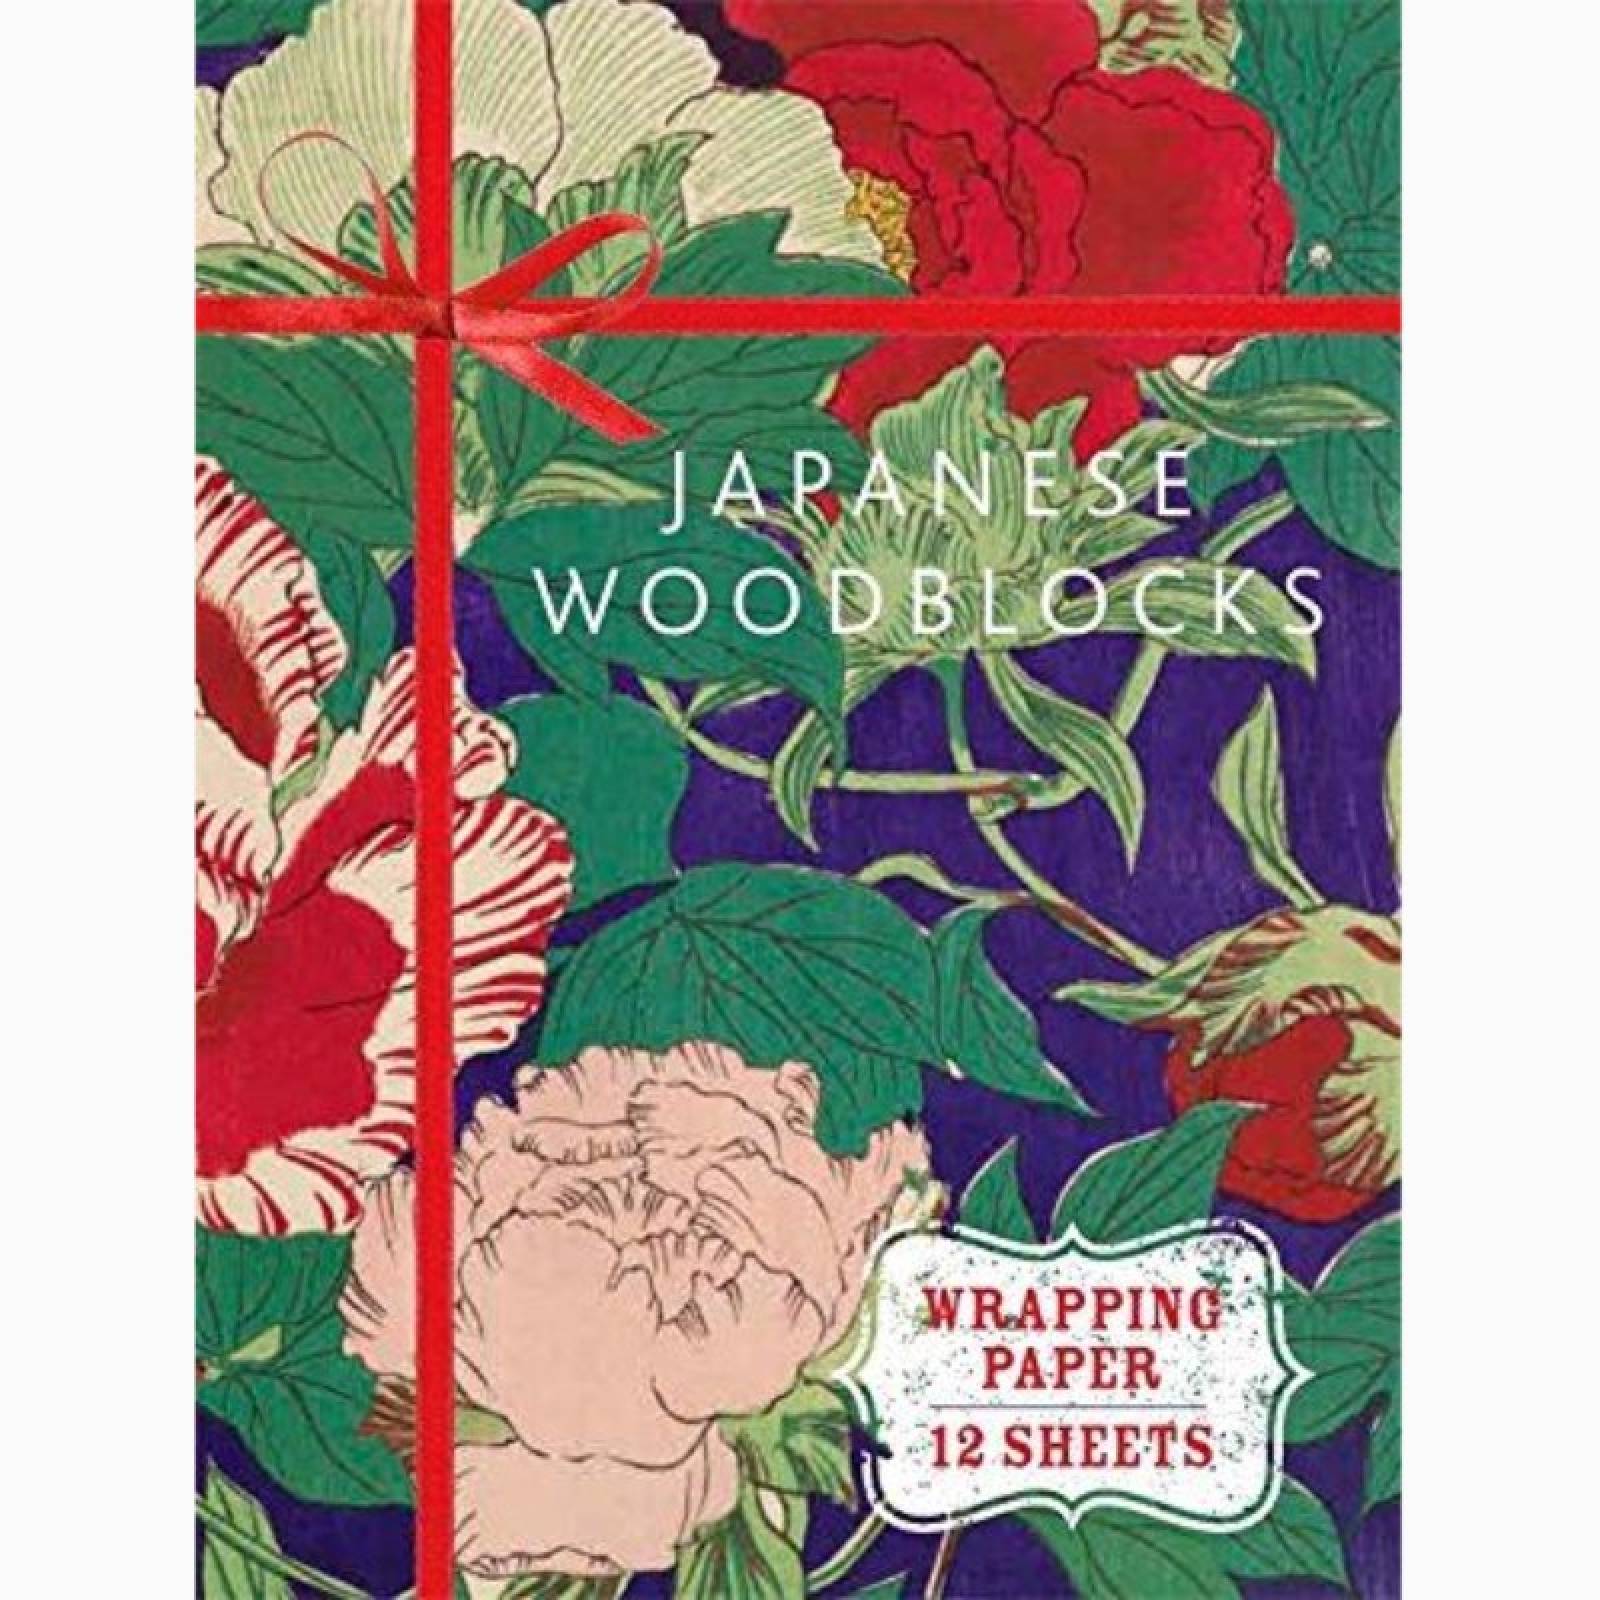 Japanese Woodblock Book Of 12 Sheets Of Wrapping Paper